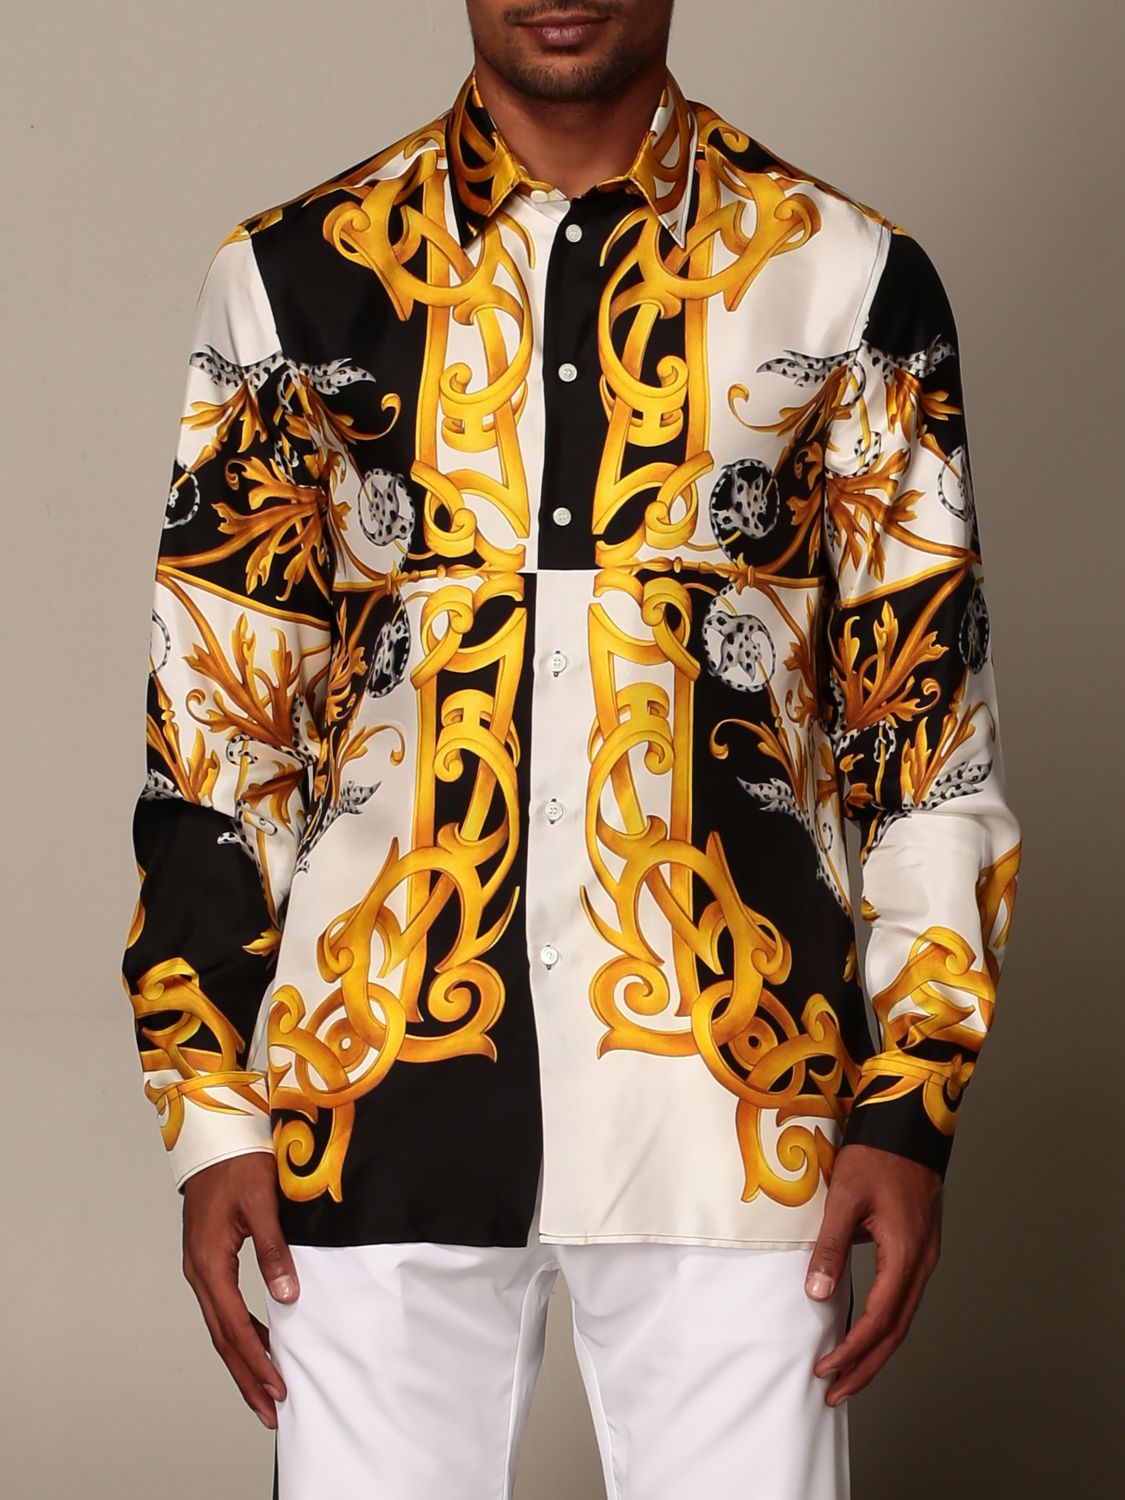 house of versace shirts